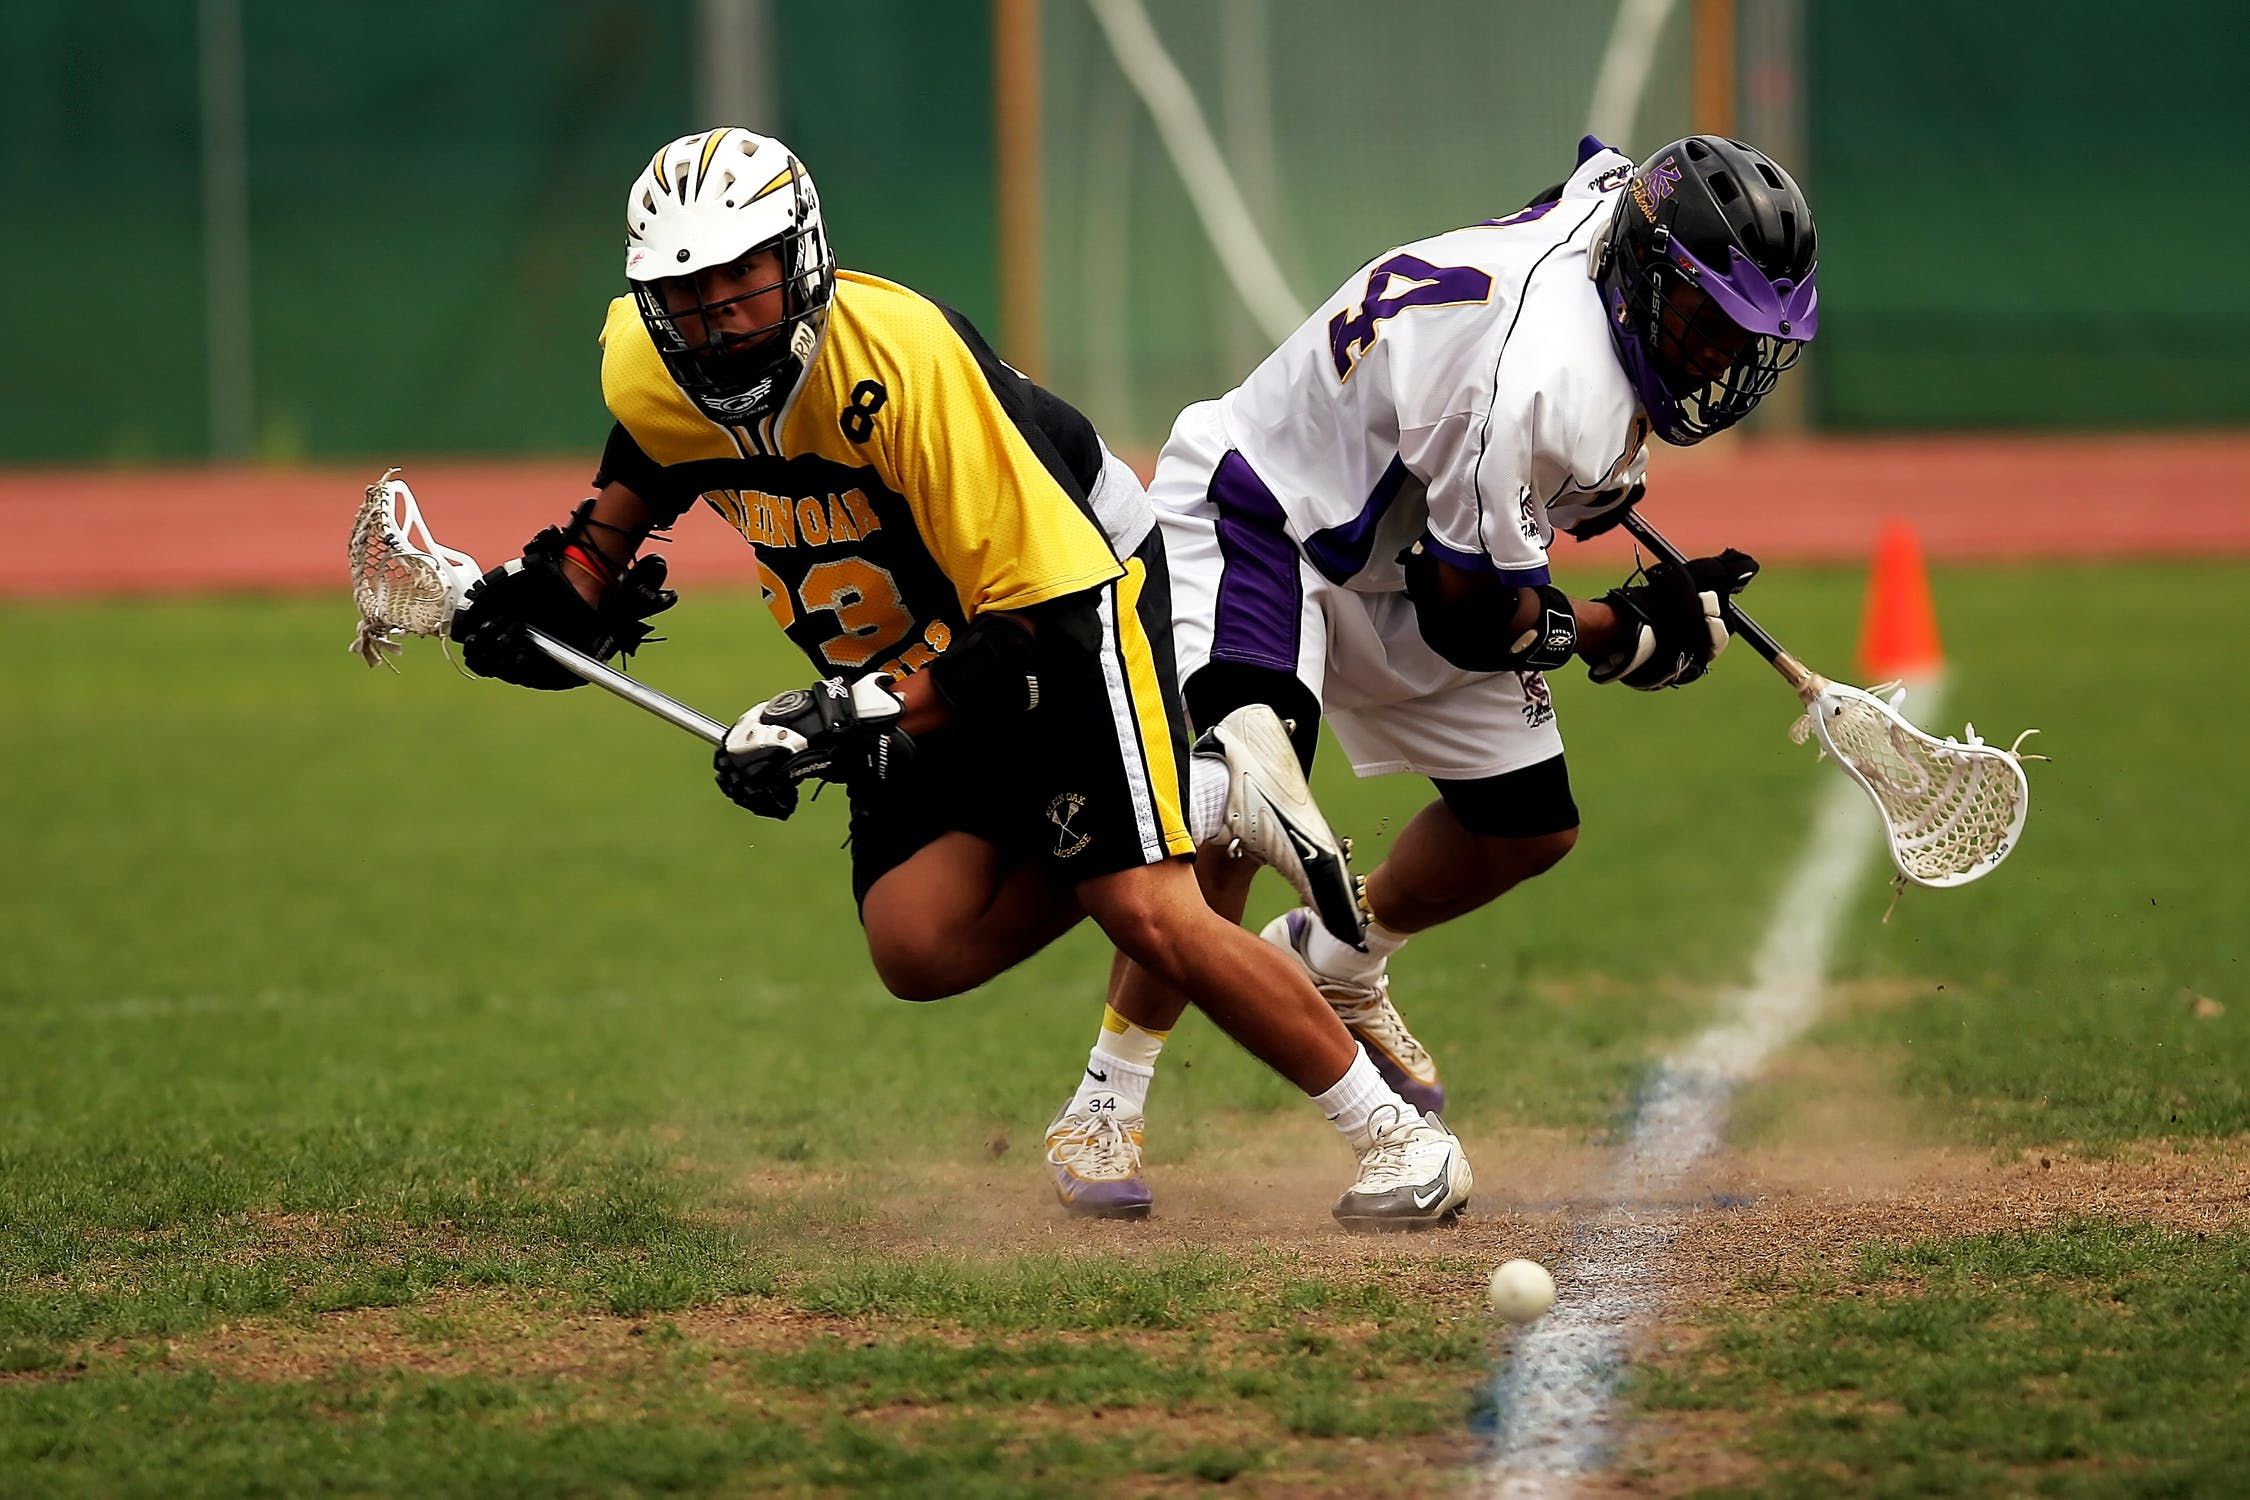 The rich and interesting history of lacrosse